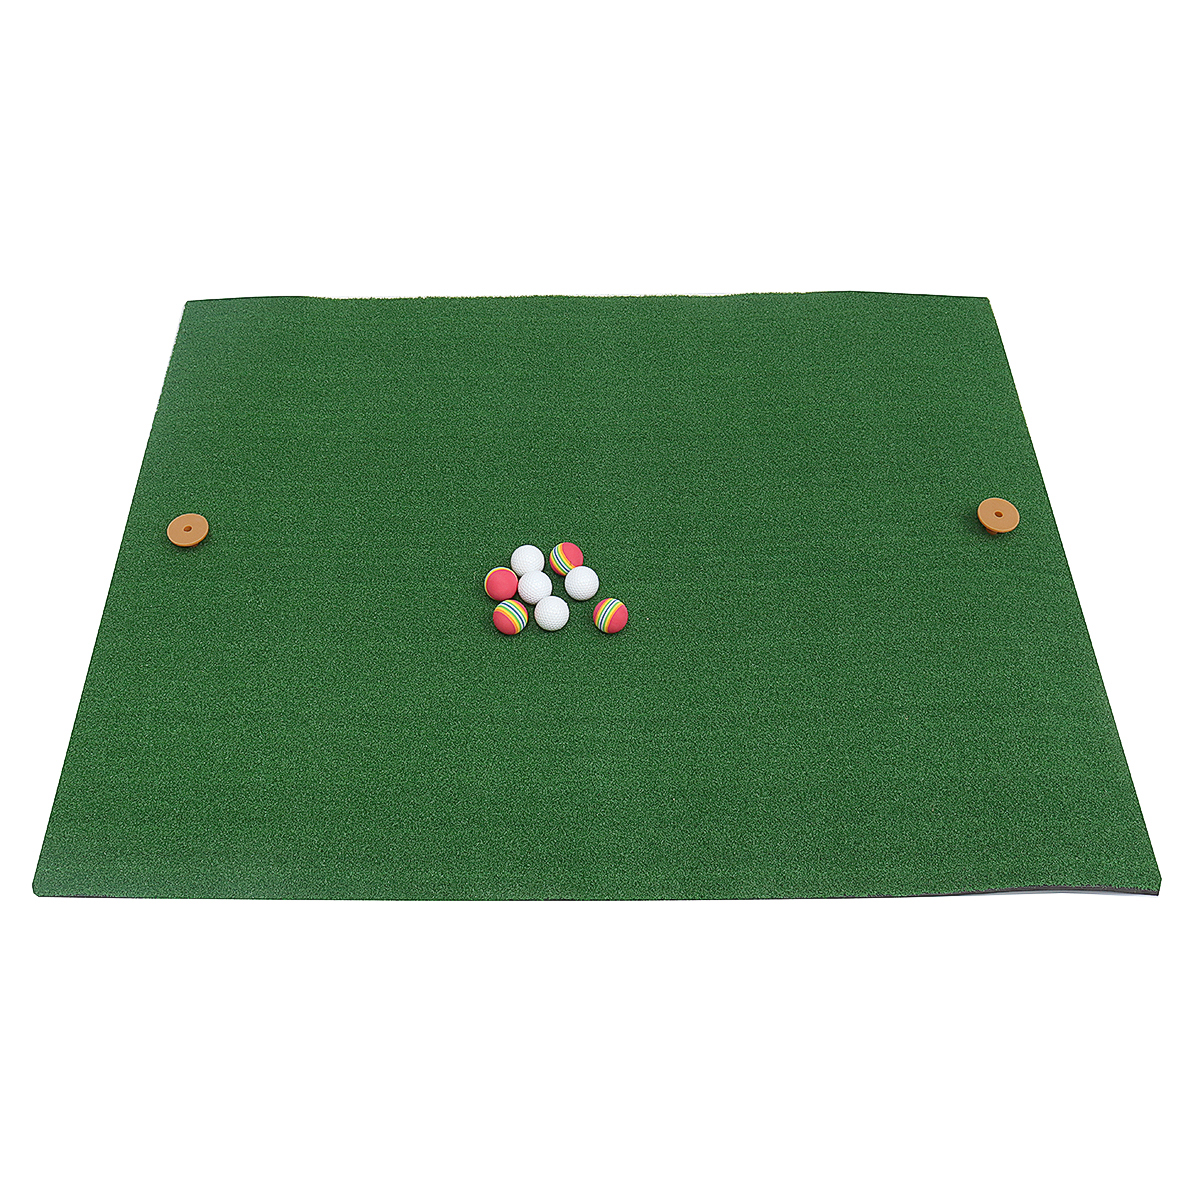 Indoor-Golf-Practice-Grass-Mat-Residential-Training-Hitting-Turf-Mat-With-Ball-amp-Tee-1550012